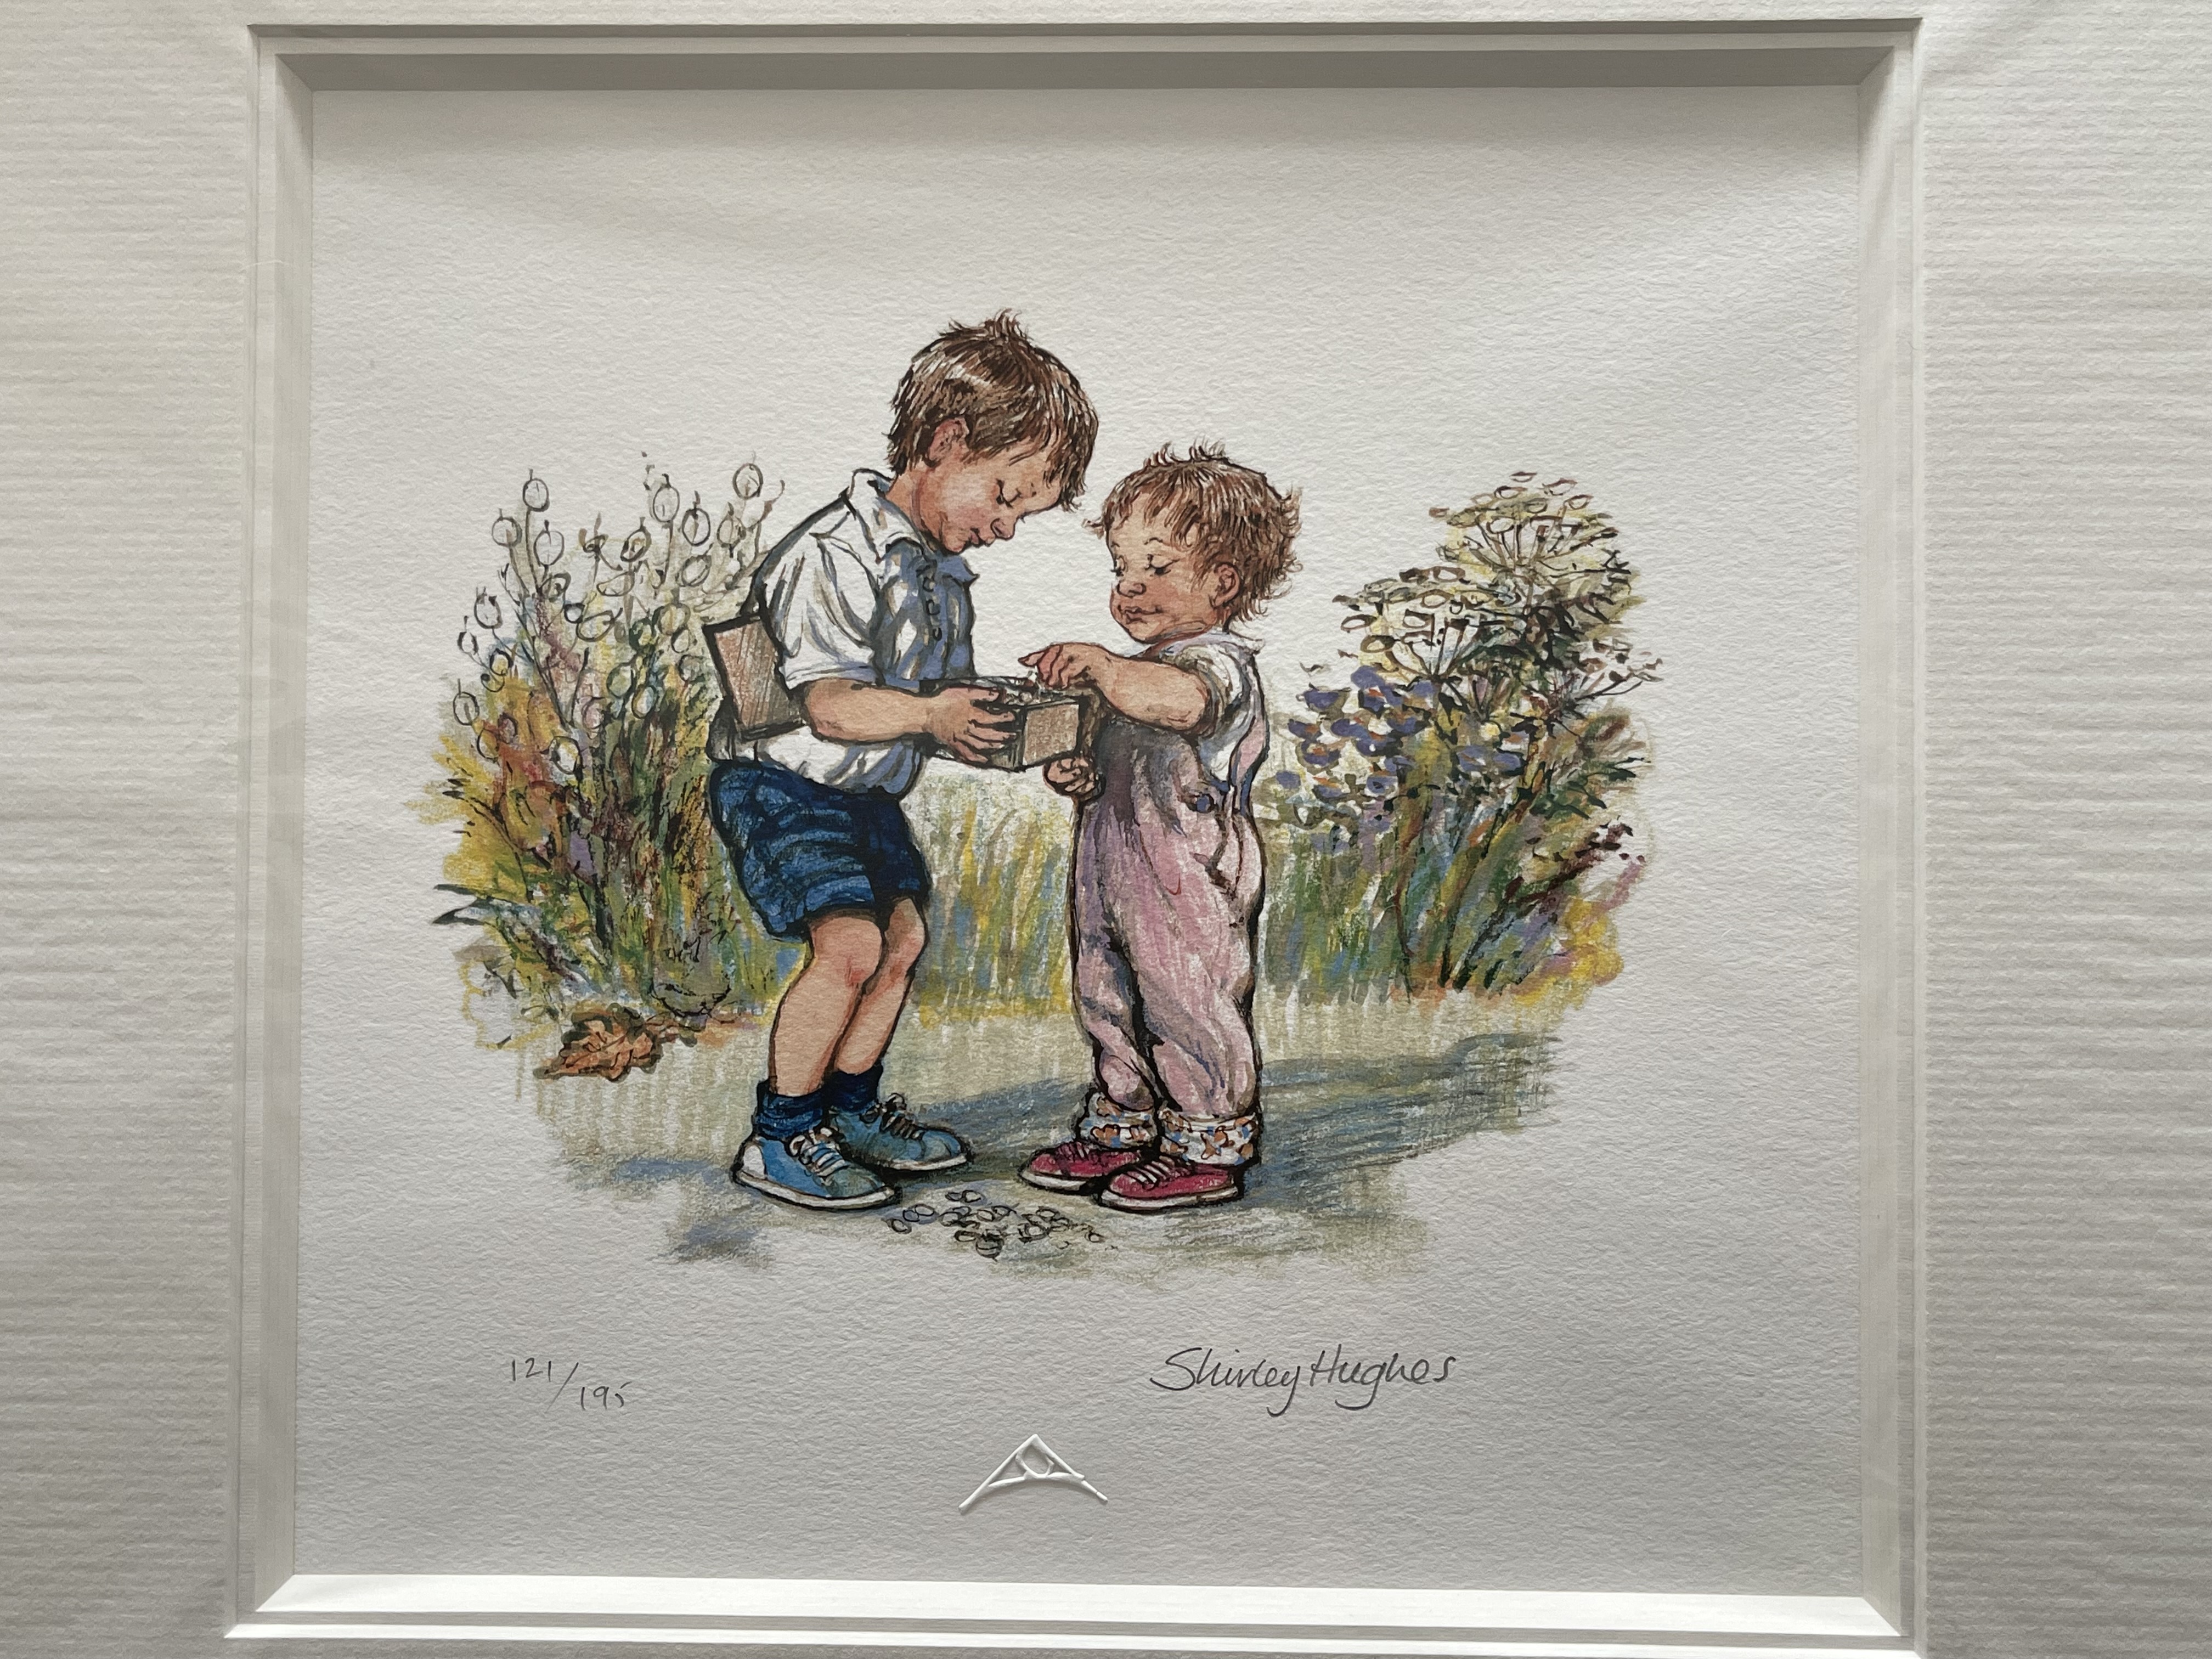 Fourteen Signed Giclée Prints by Shirley Hughes - - Image 40 of 51